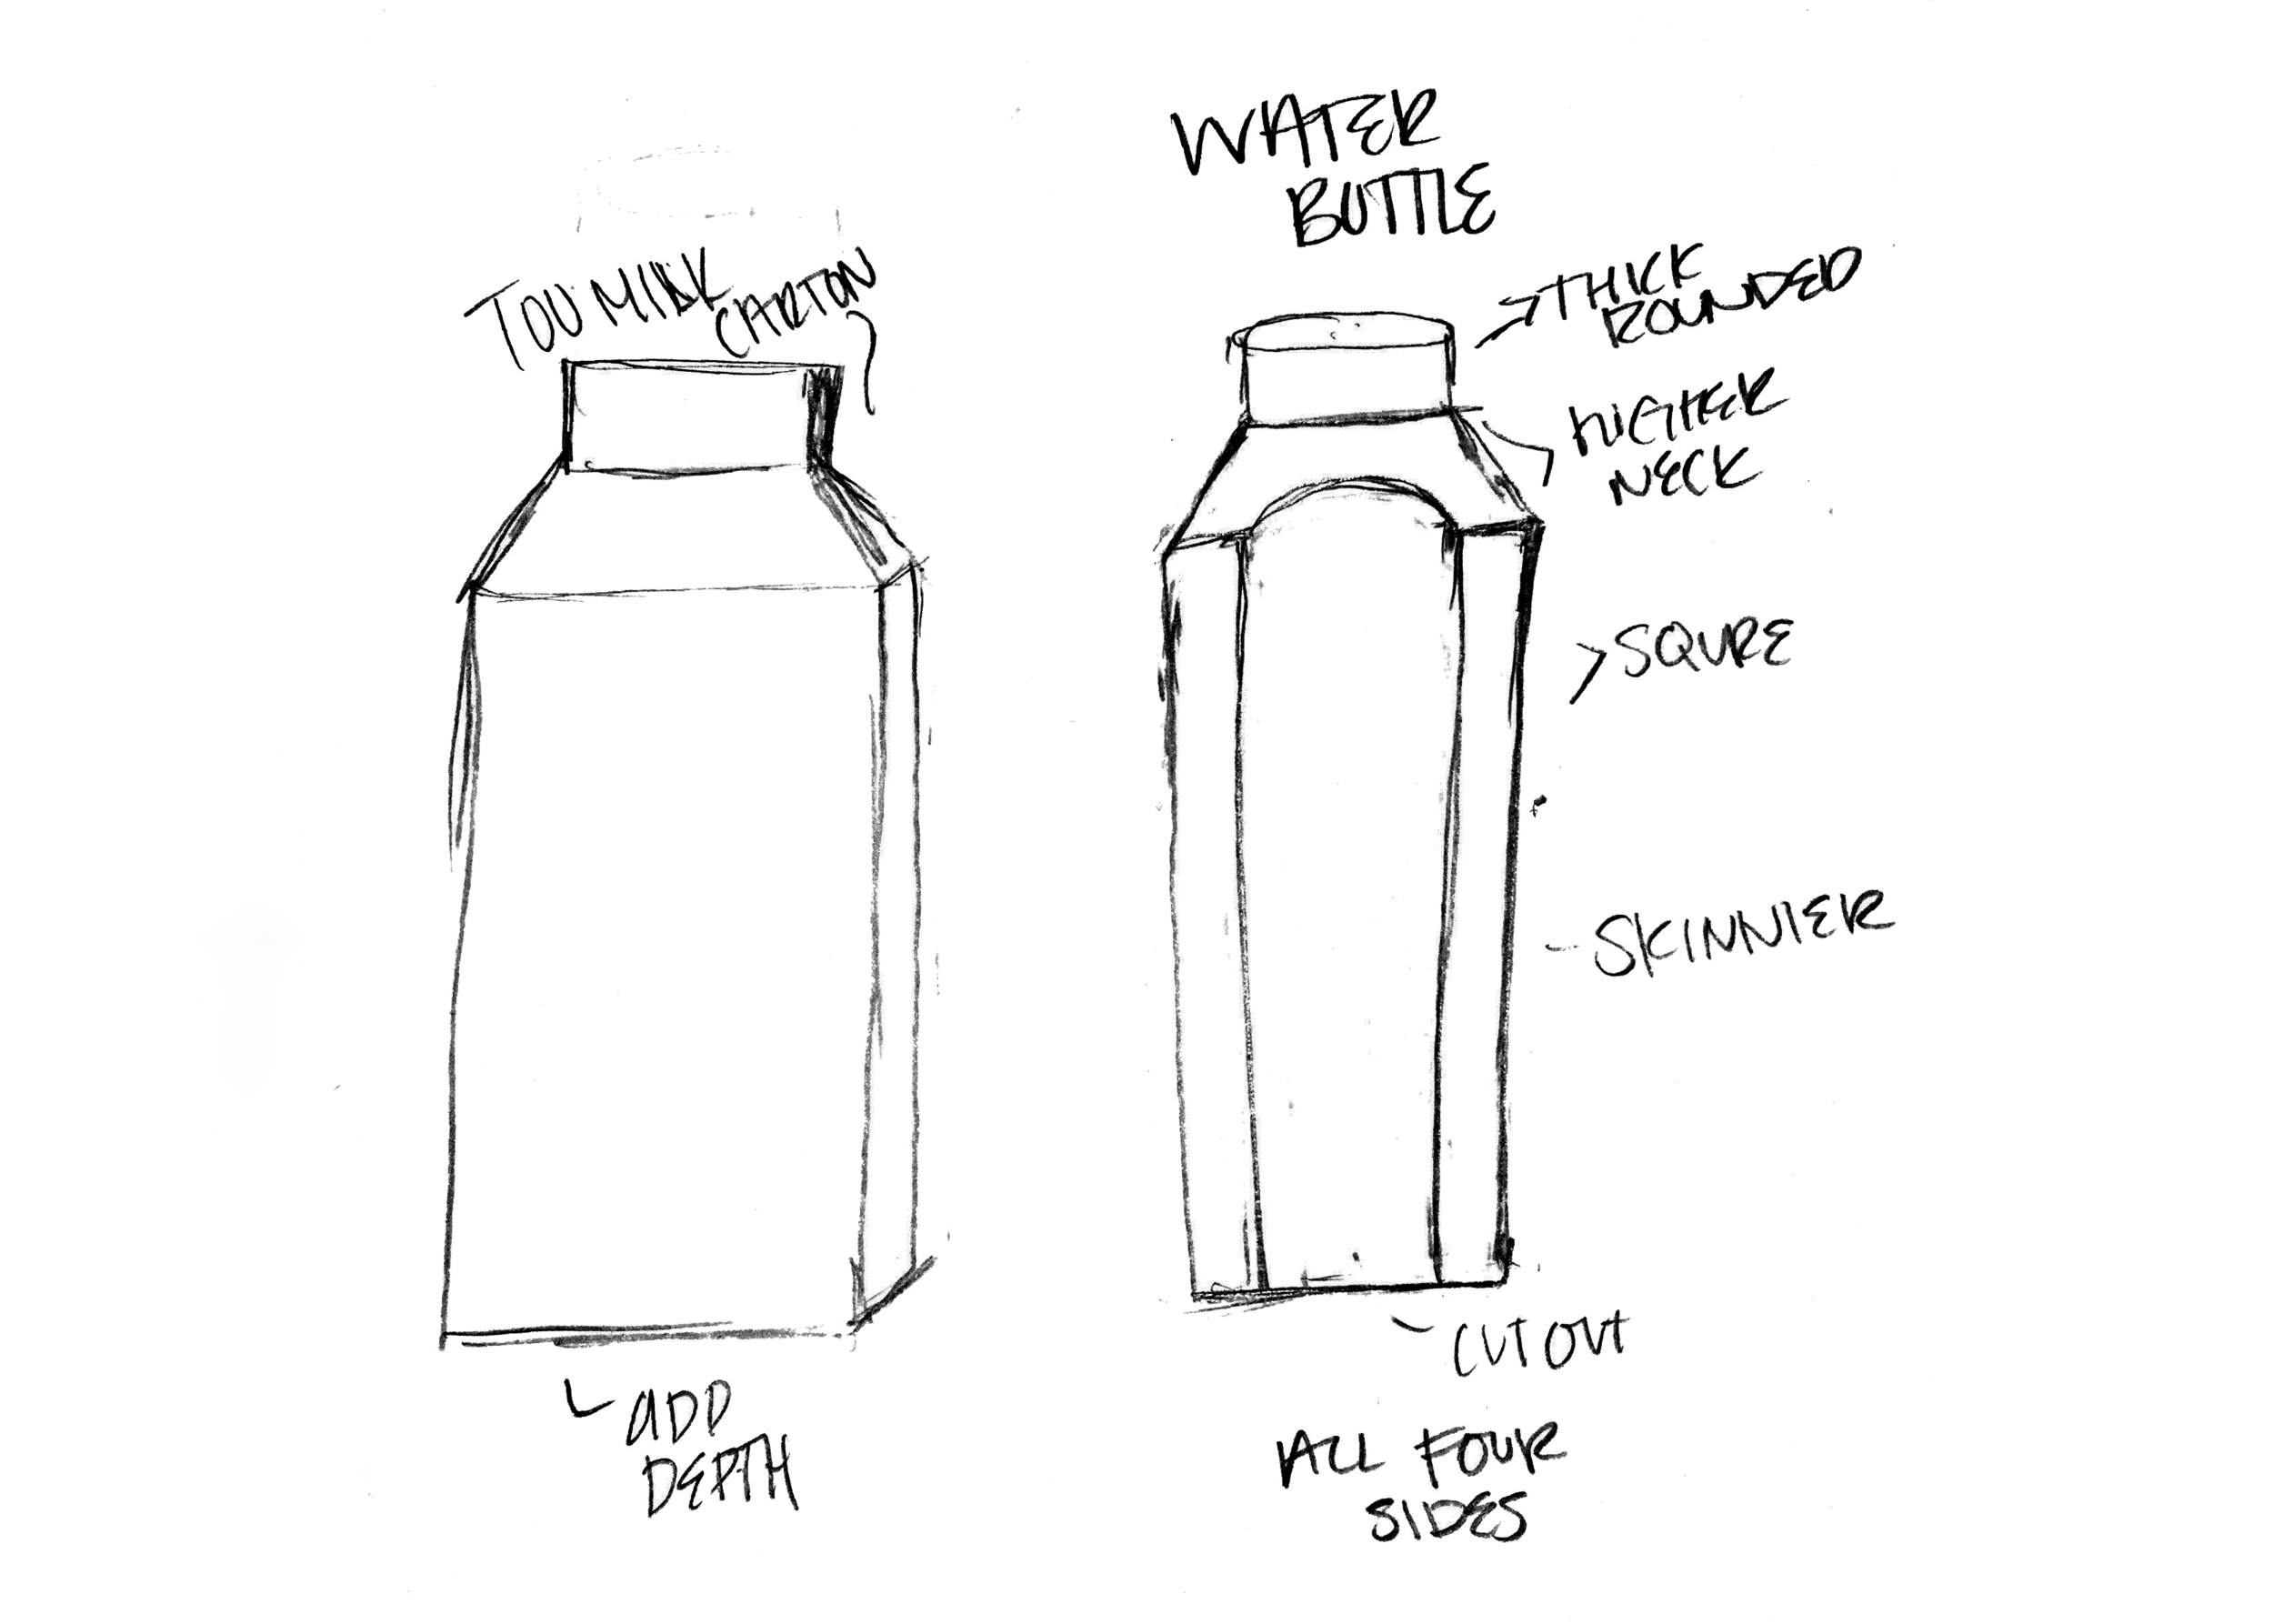  Concept drawings created during the brainstorming portion of the design process. The water bottle drawing on the left was improved to create the final concept on the right.&nbsp; 